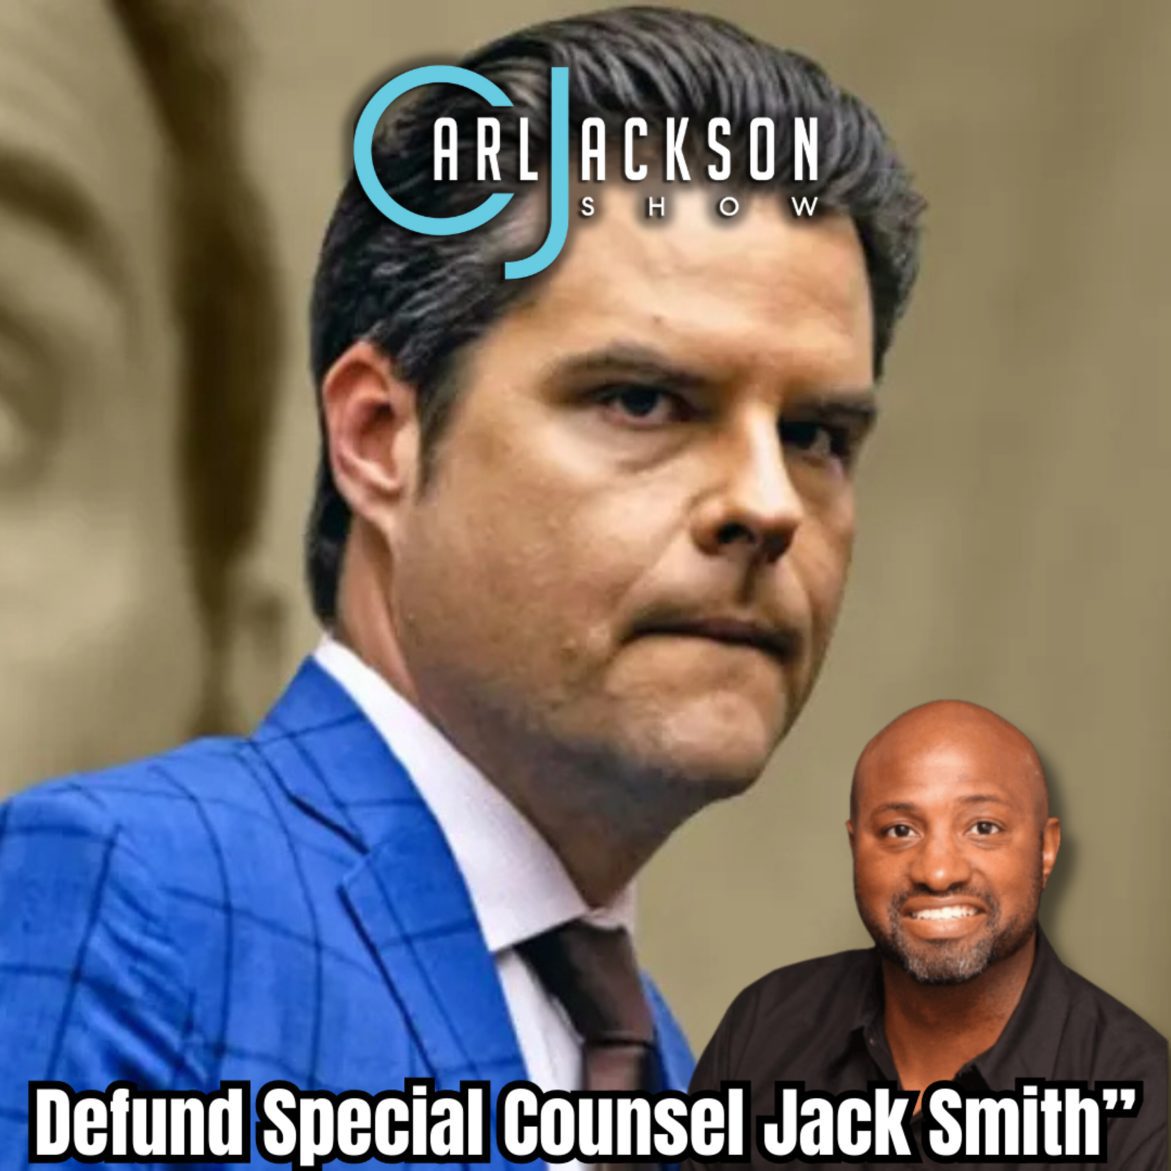 Black Podcasting - Defund Special Counsel Jack Smith”